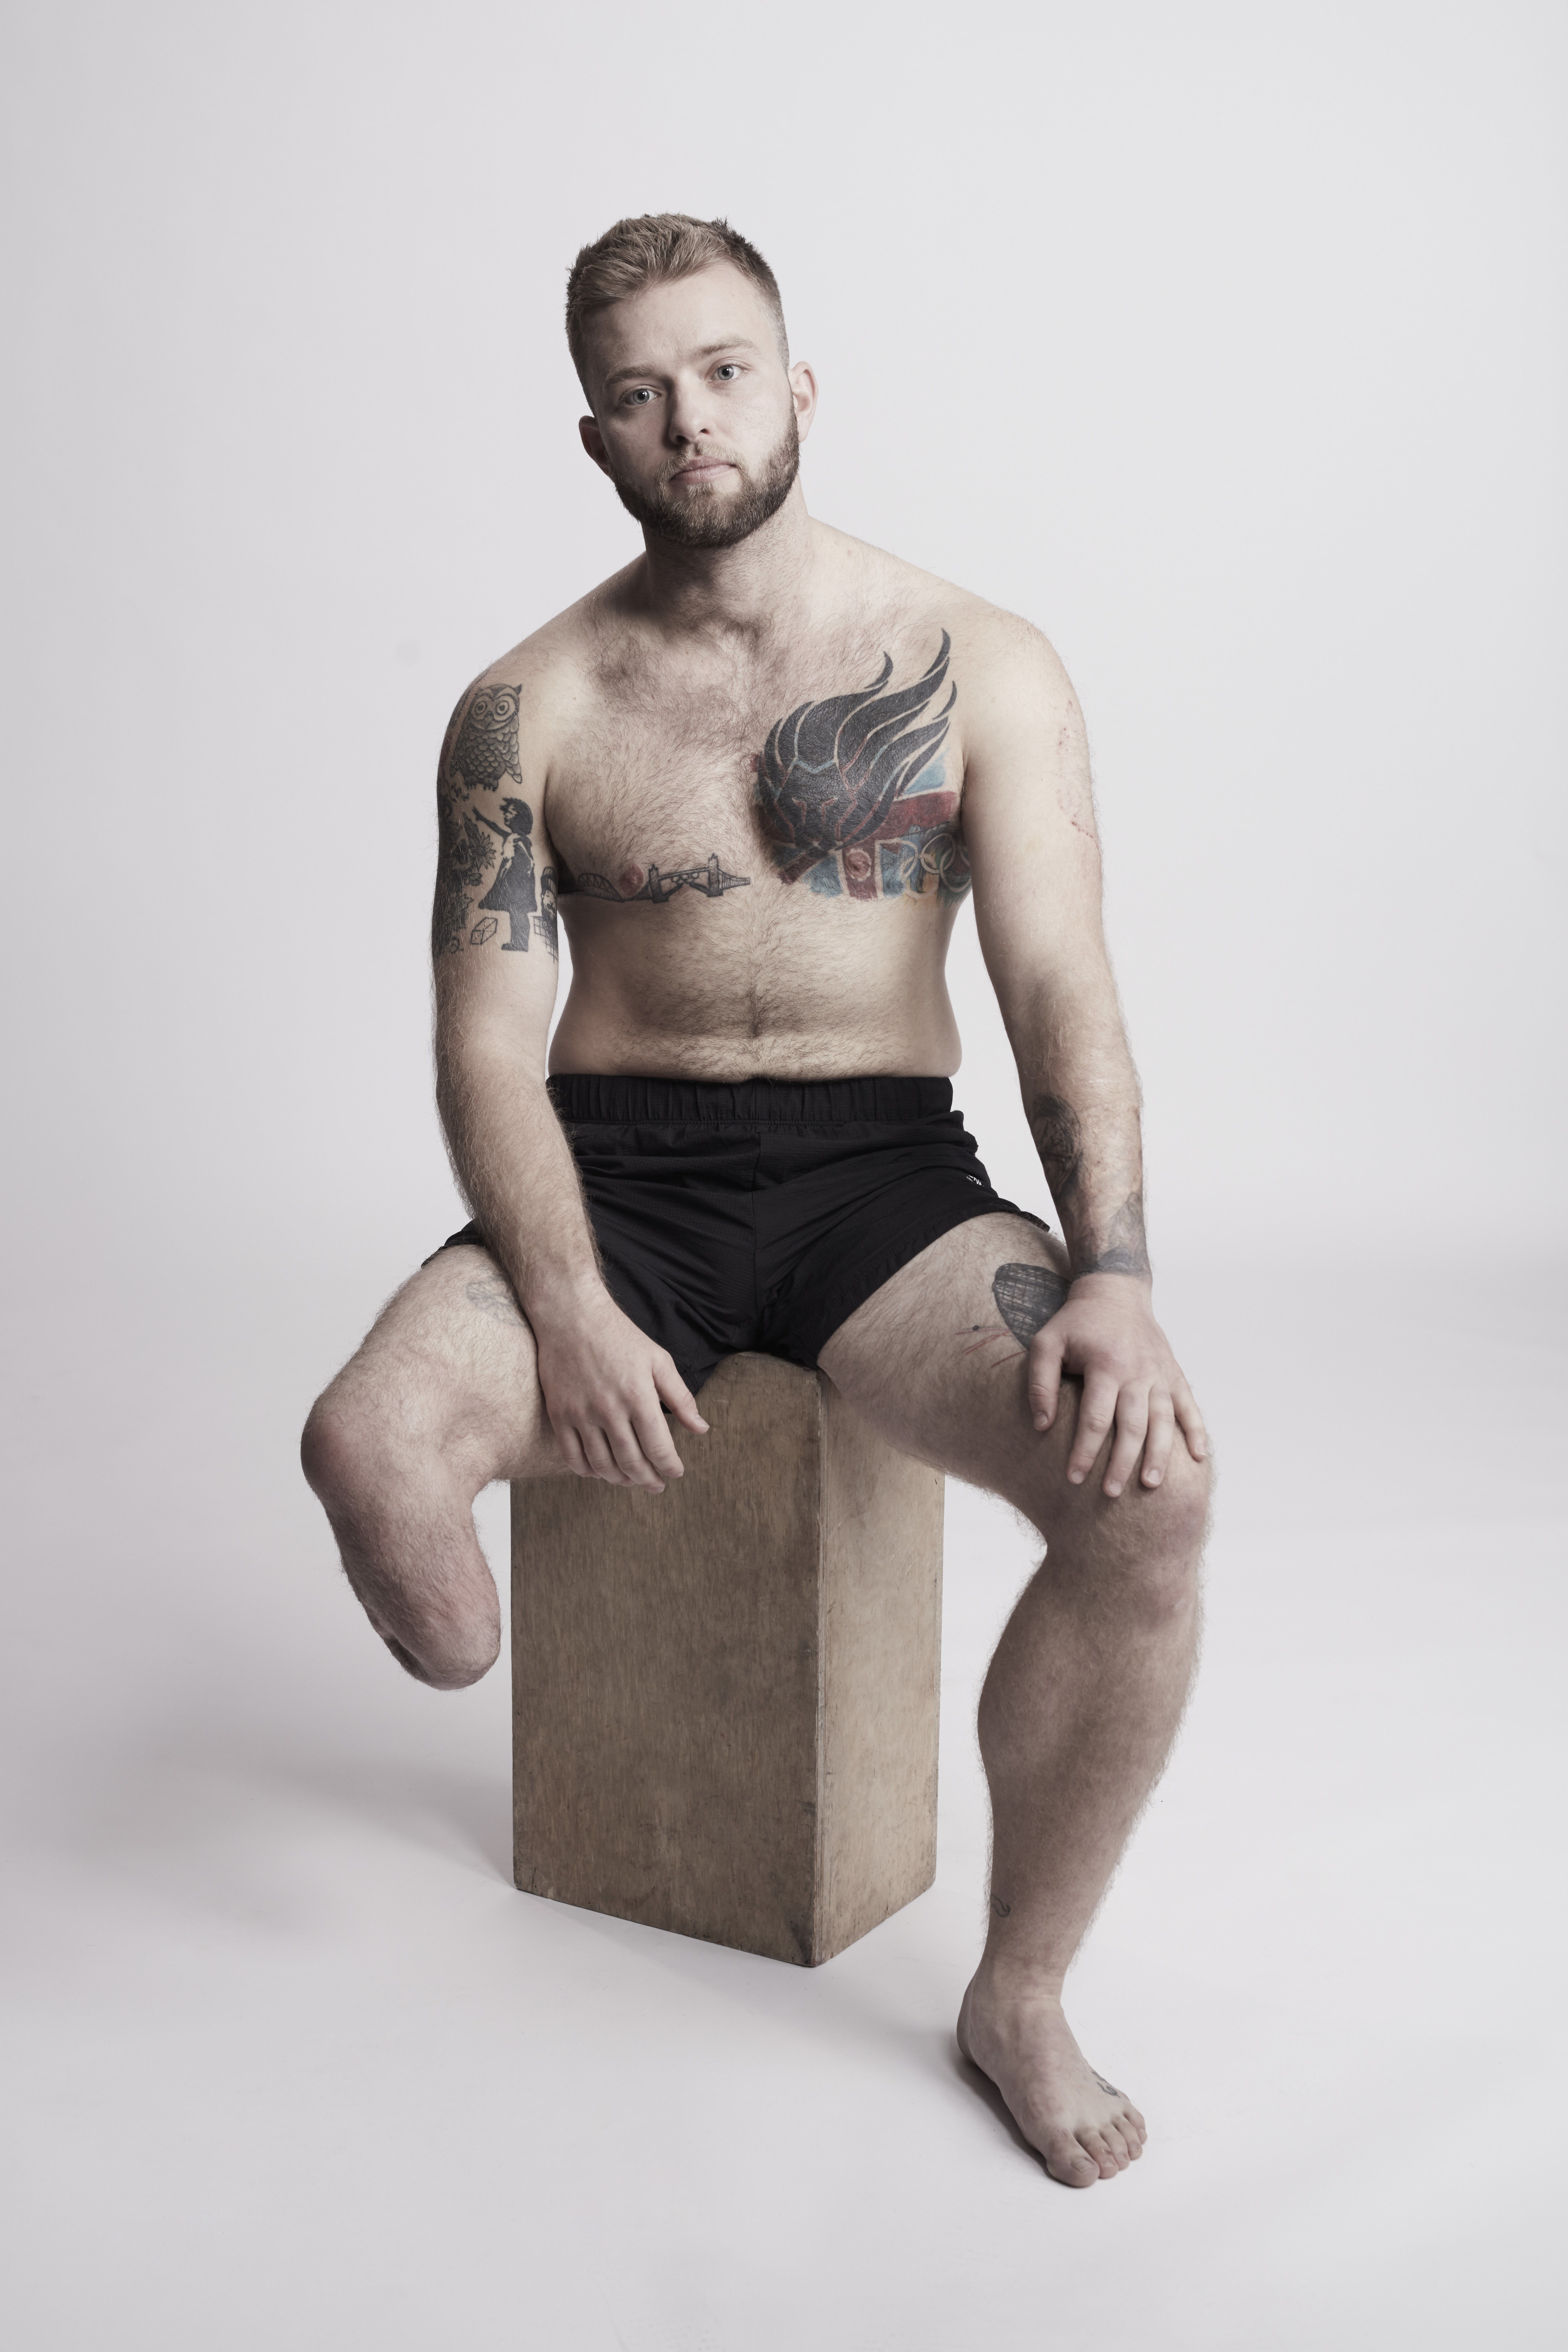 Jamie, a man with lower limb amputation and tattoos sitting on a wooden stool.